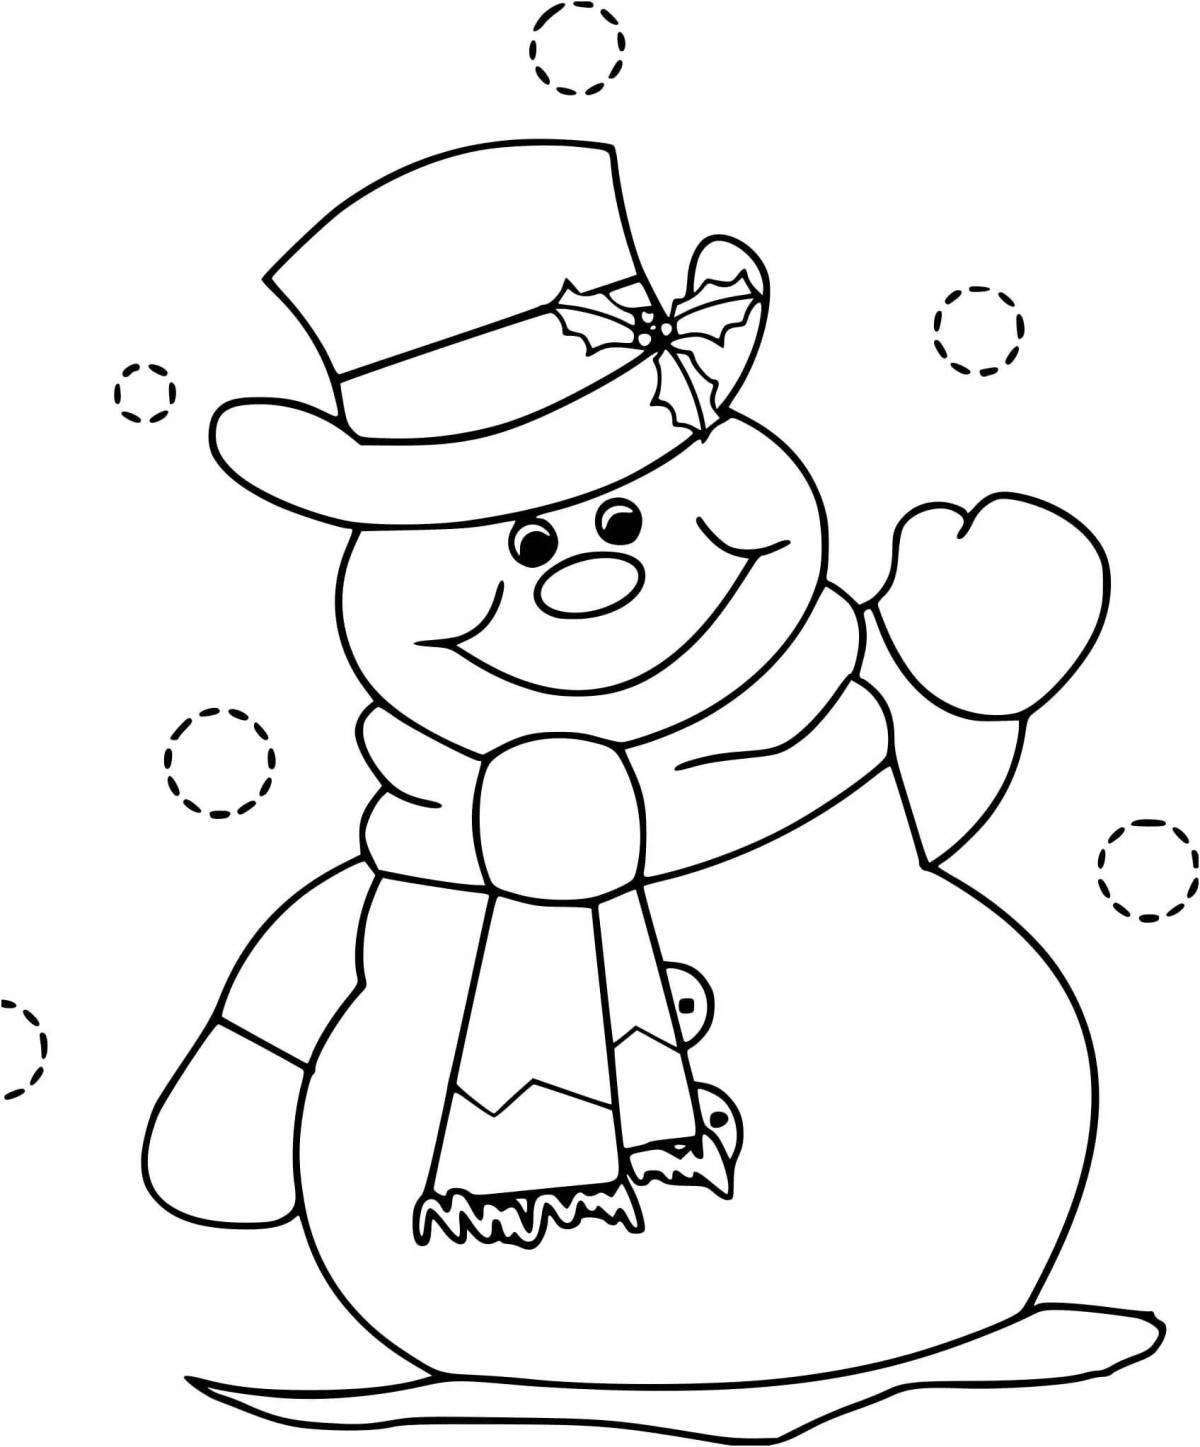 Colorful birthday snowman coloring page